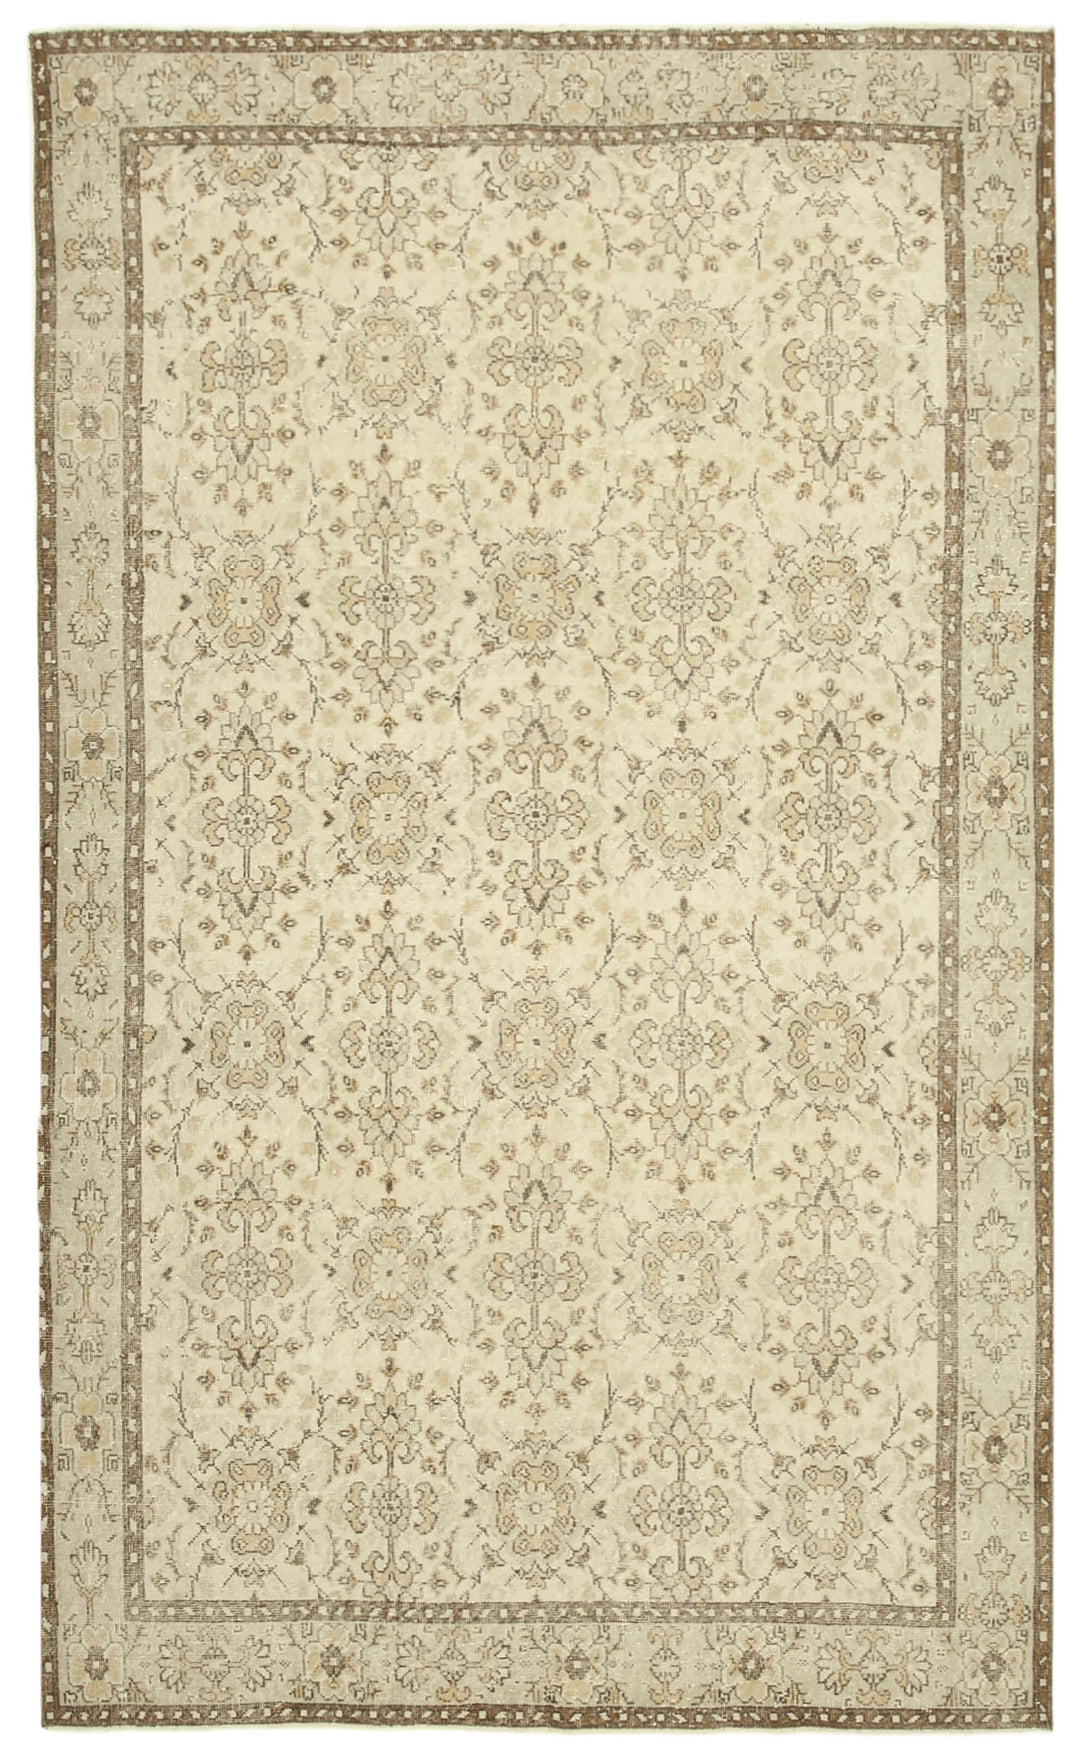 Handmade White Wash Area Rug > Design# OL-AC-39066 > Size: 6'-2" x 10'-2", Carpet Culture Rugs, Handmade Rugs, NYC Rugs, New Rugs, Shop Rugs, Rug Store, Outlet Rugs, SoHo Rugs, Rugs in USA